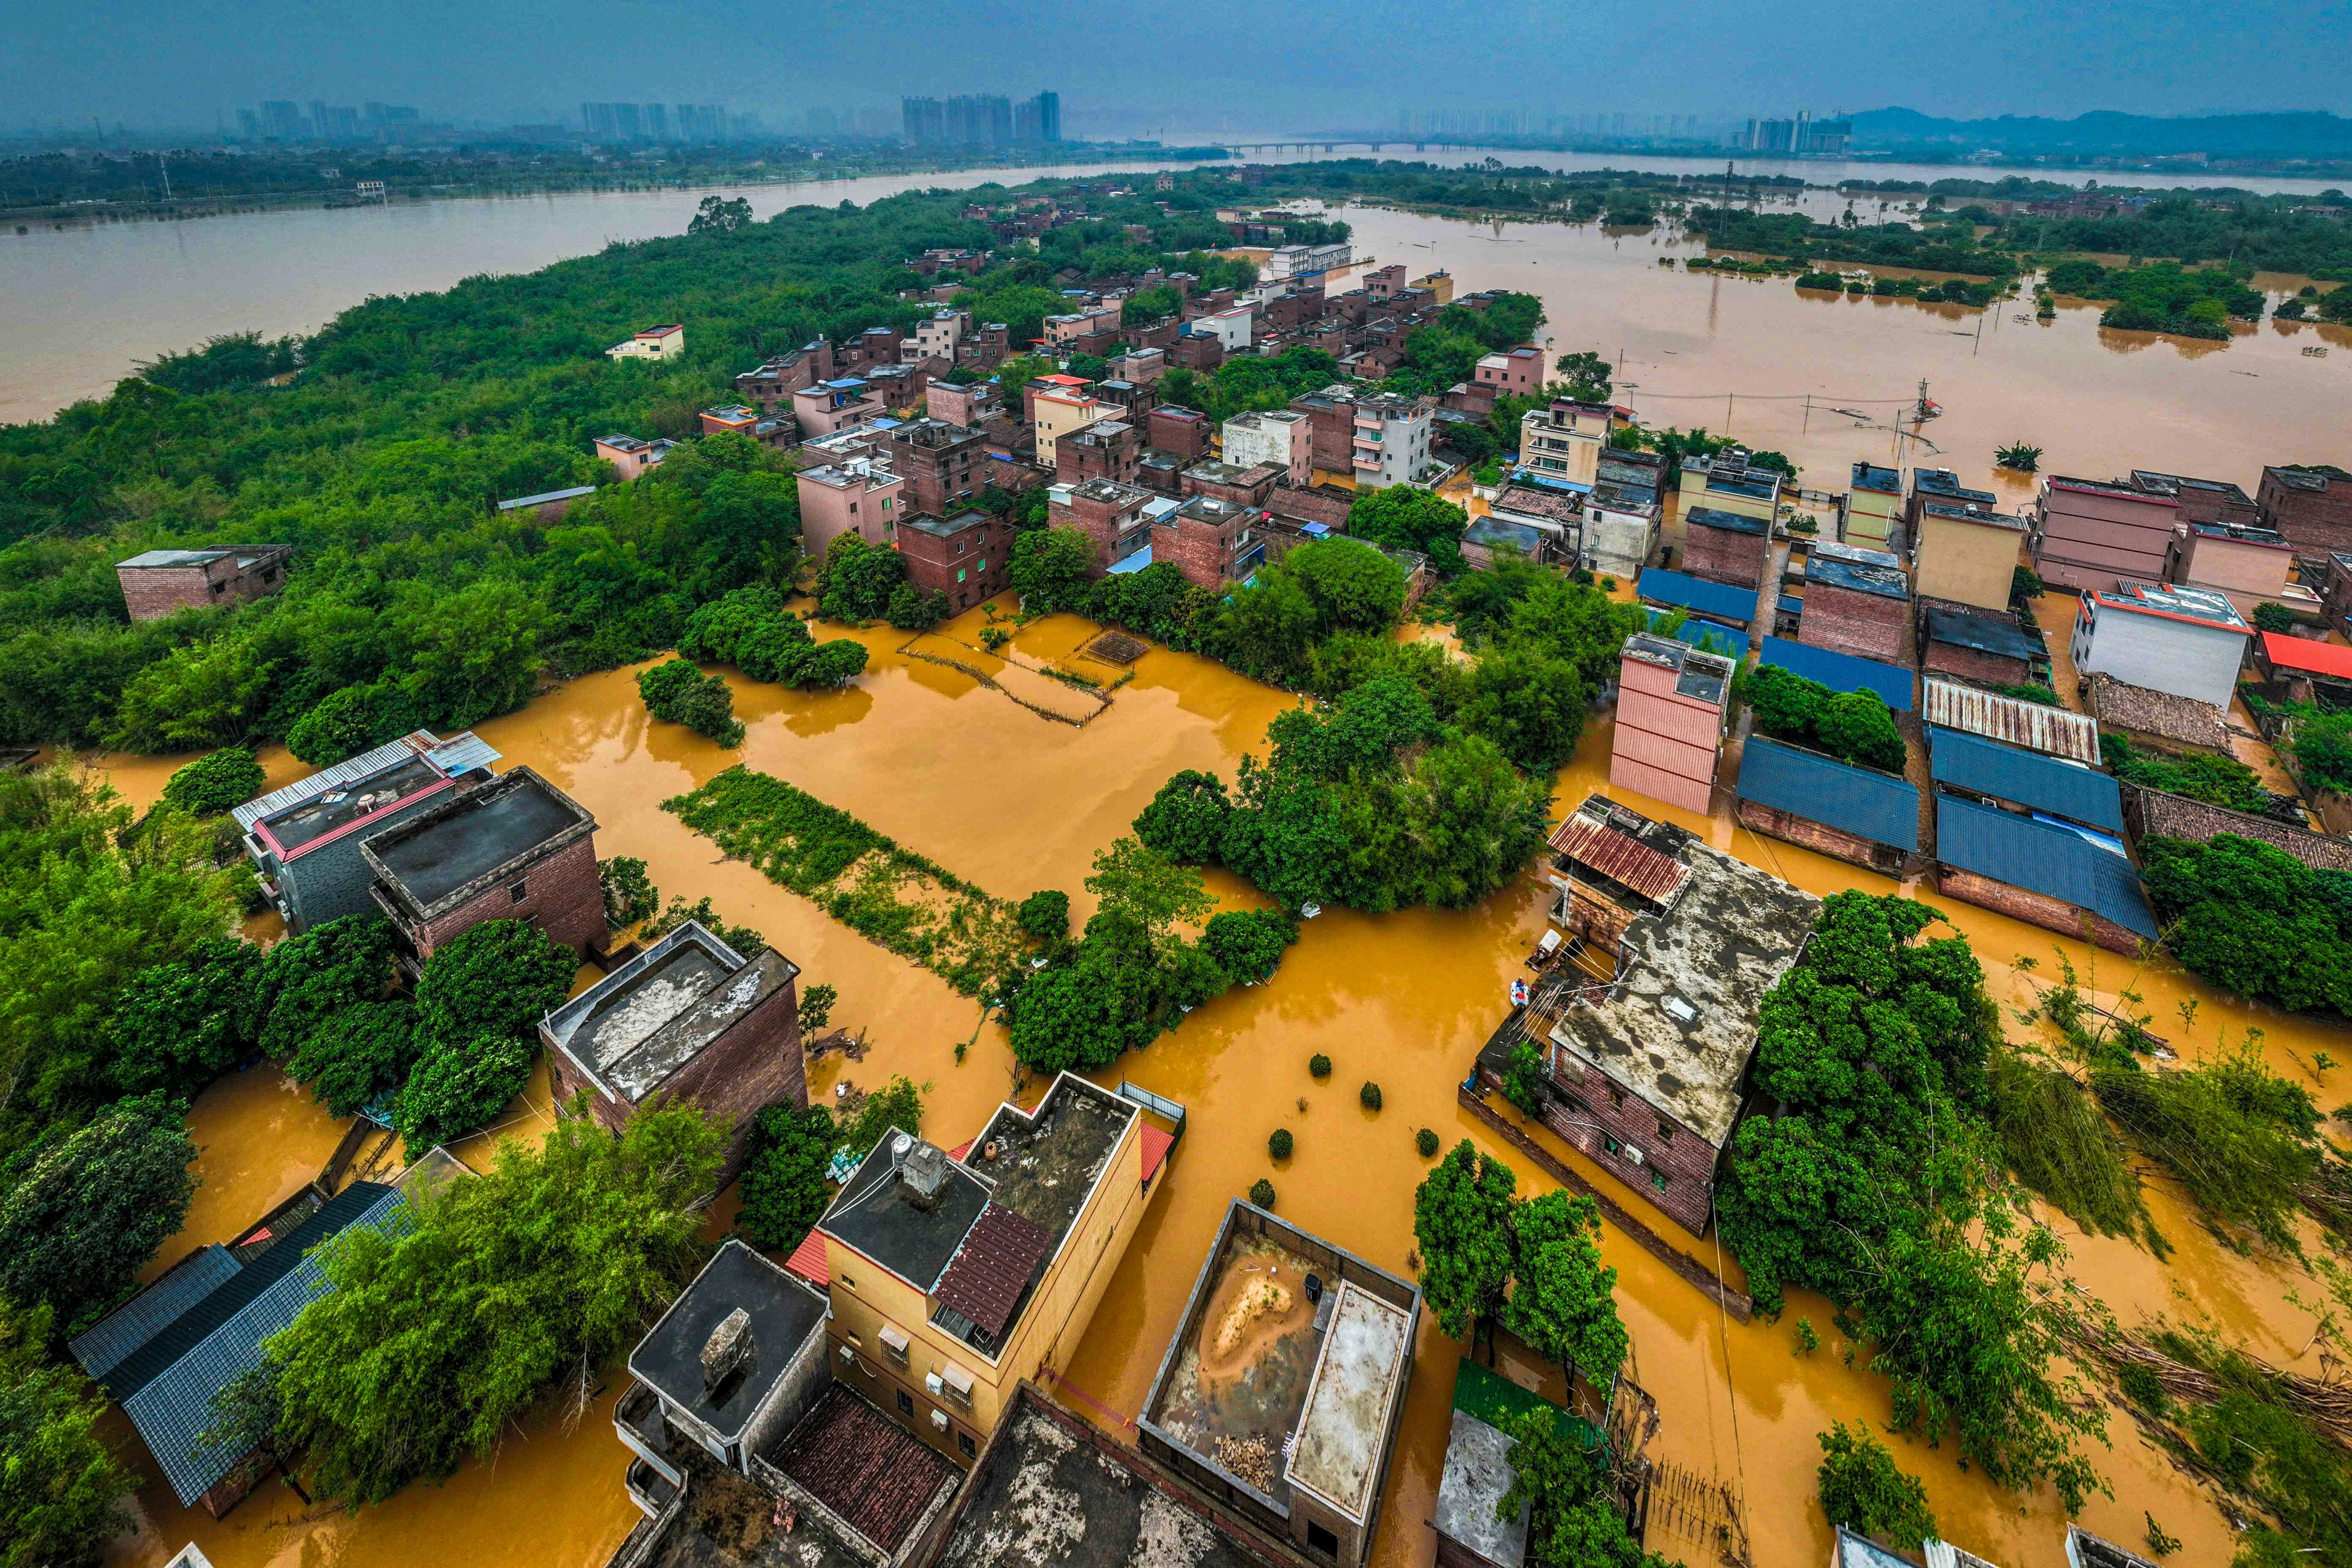 Torrential rainfall and severe flooding have submerged parts of southern China, with forecasters expecting more moisture ahead. Photo: AFP